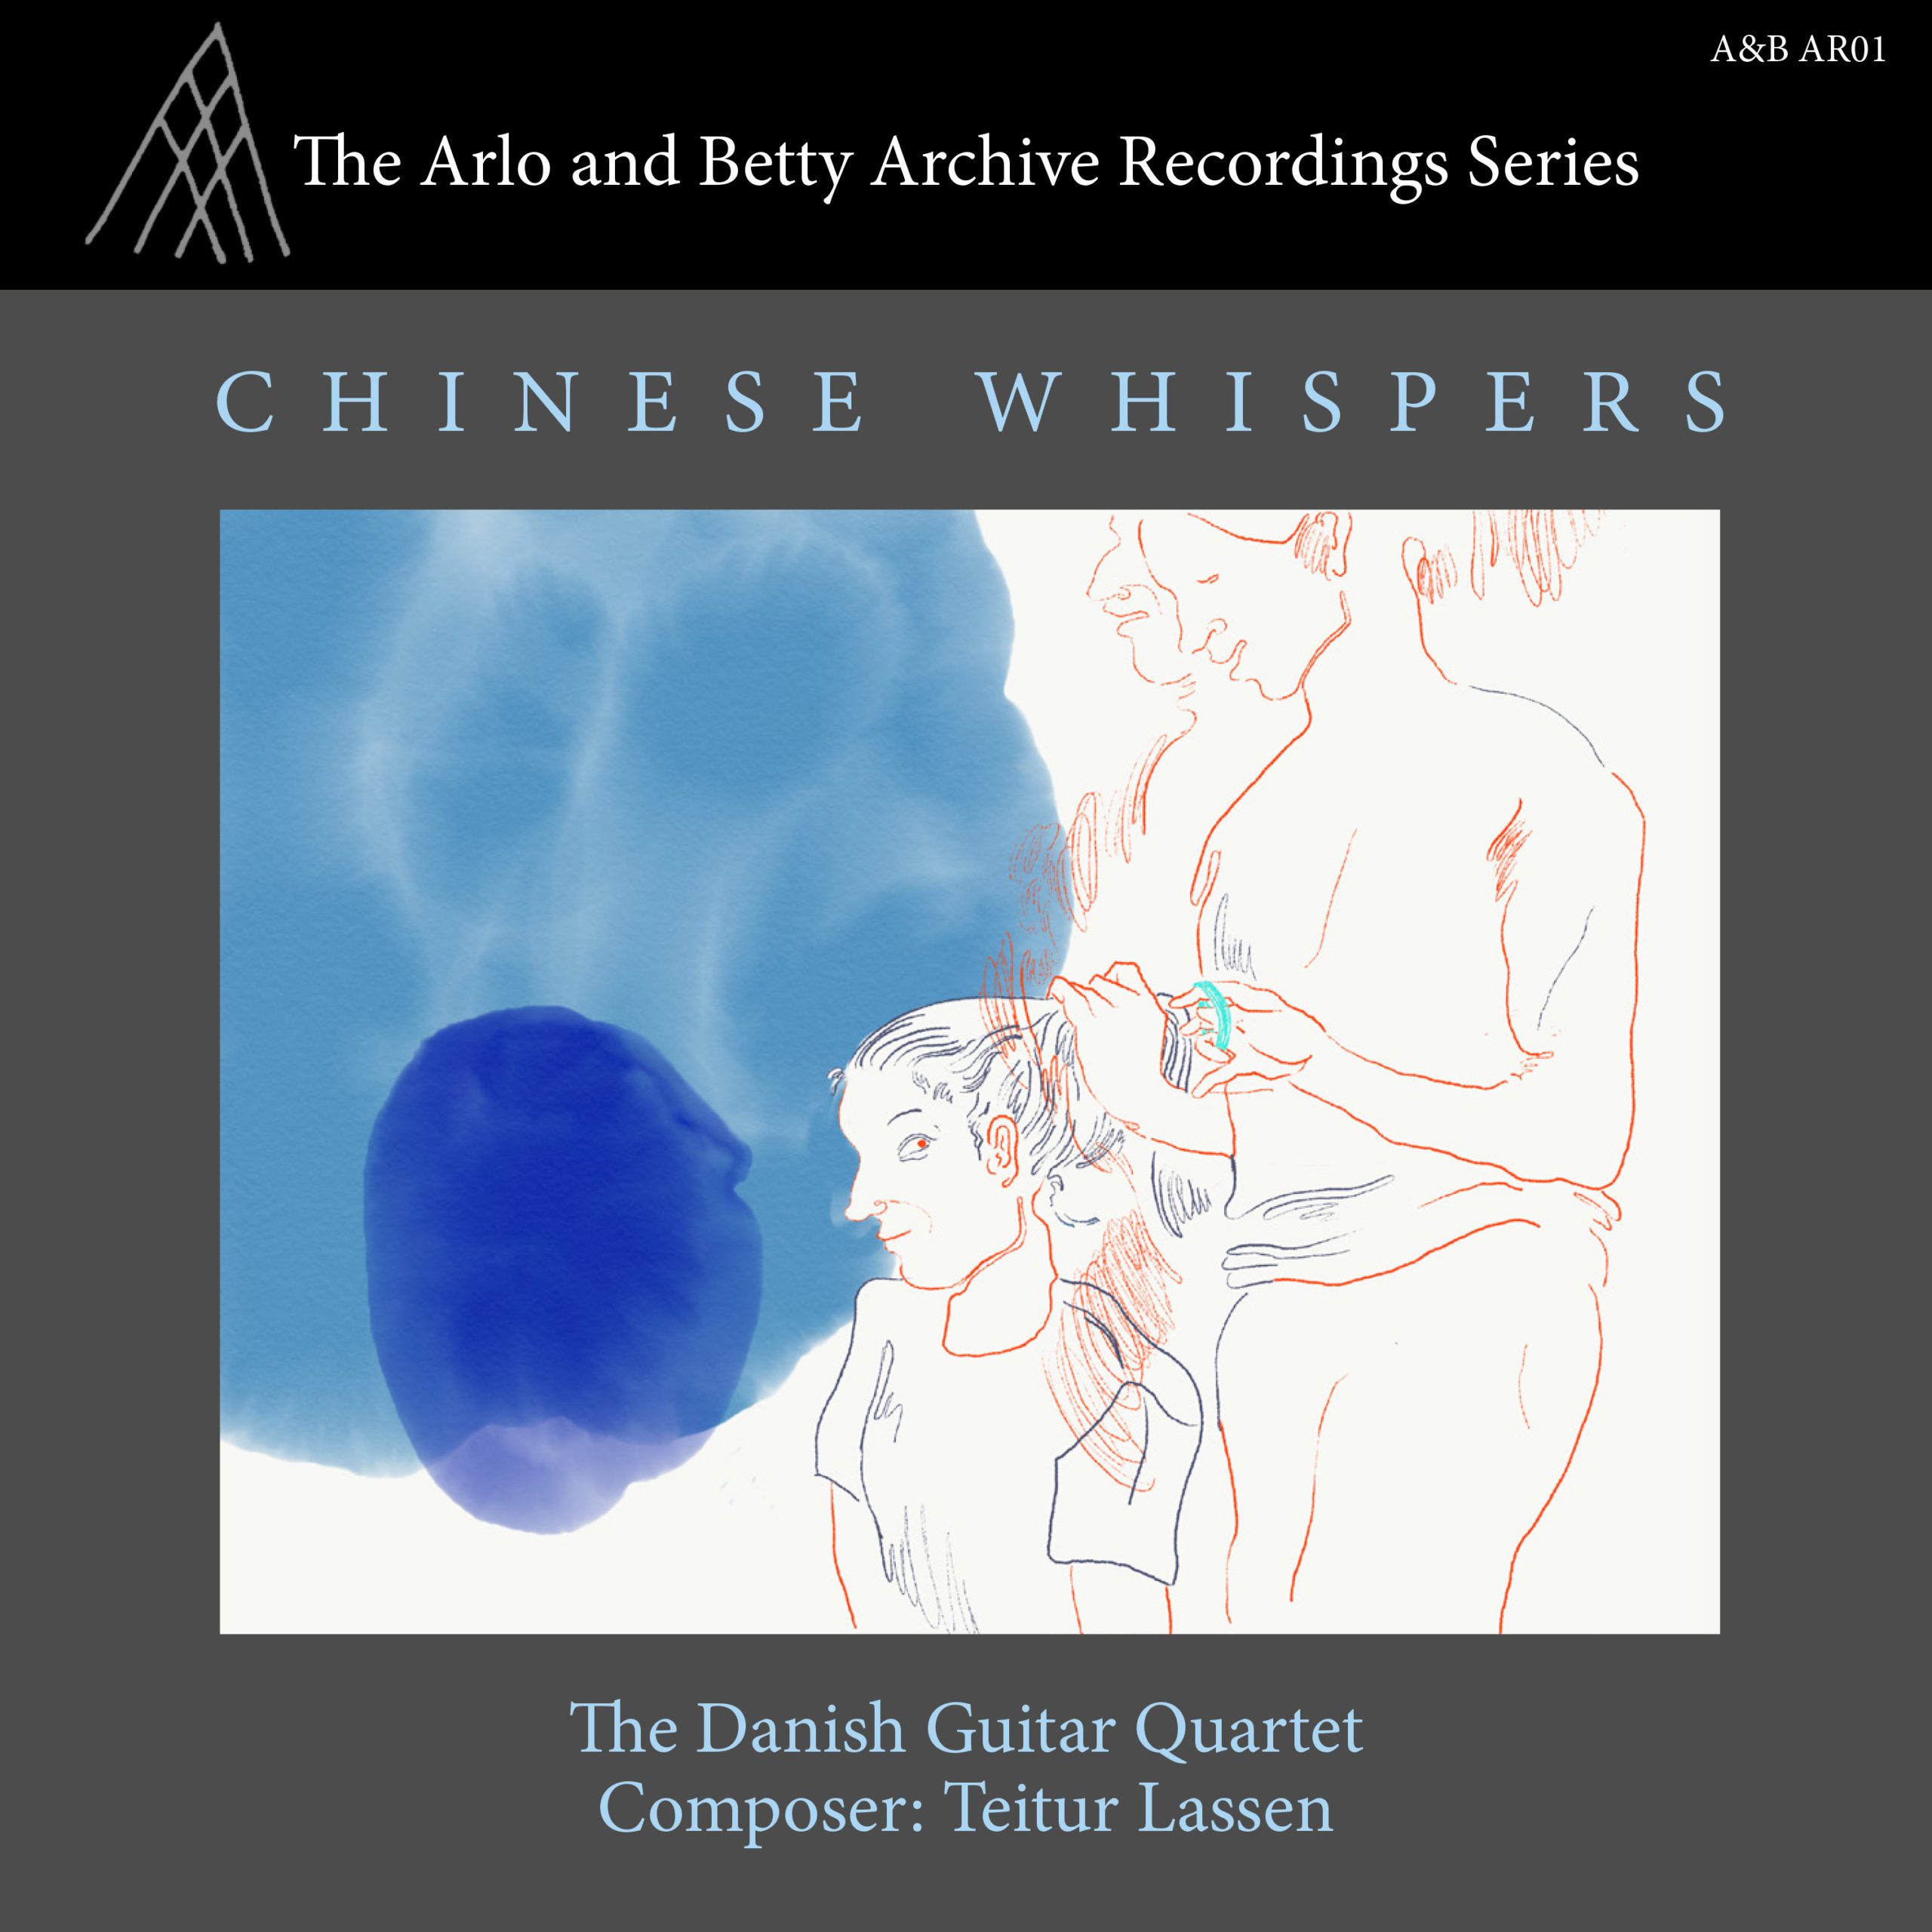 Featured image for “Chinese Whispers by The Danish Guitar Quartet, music composed by Teitur, out now..”